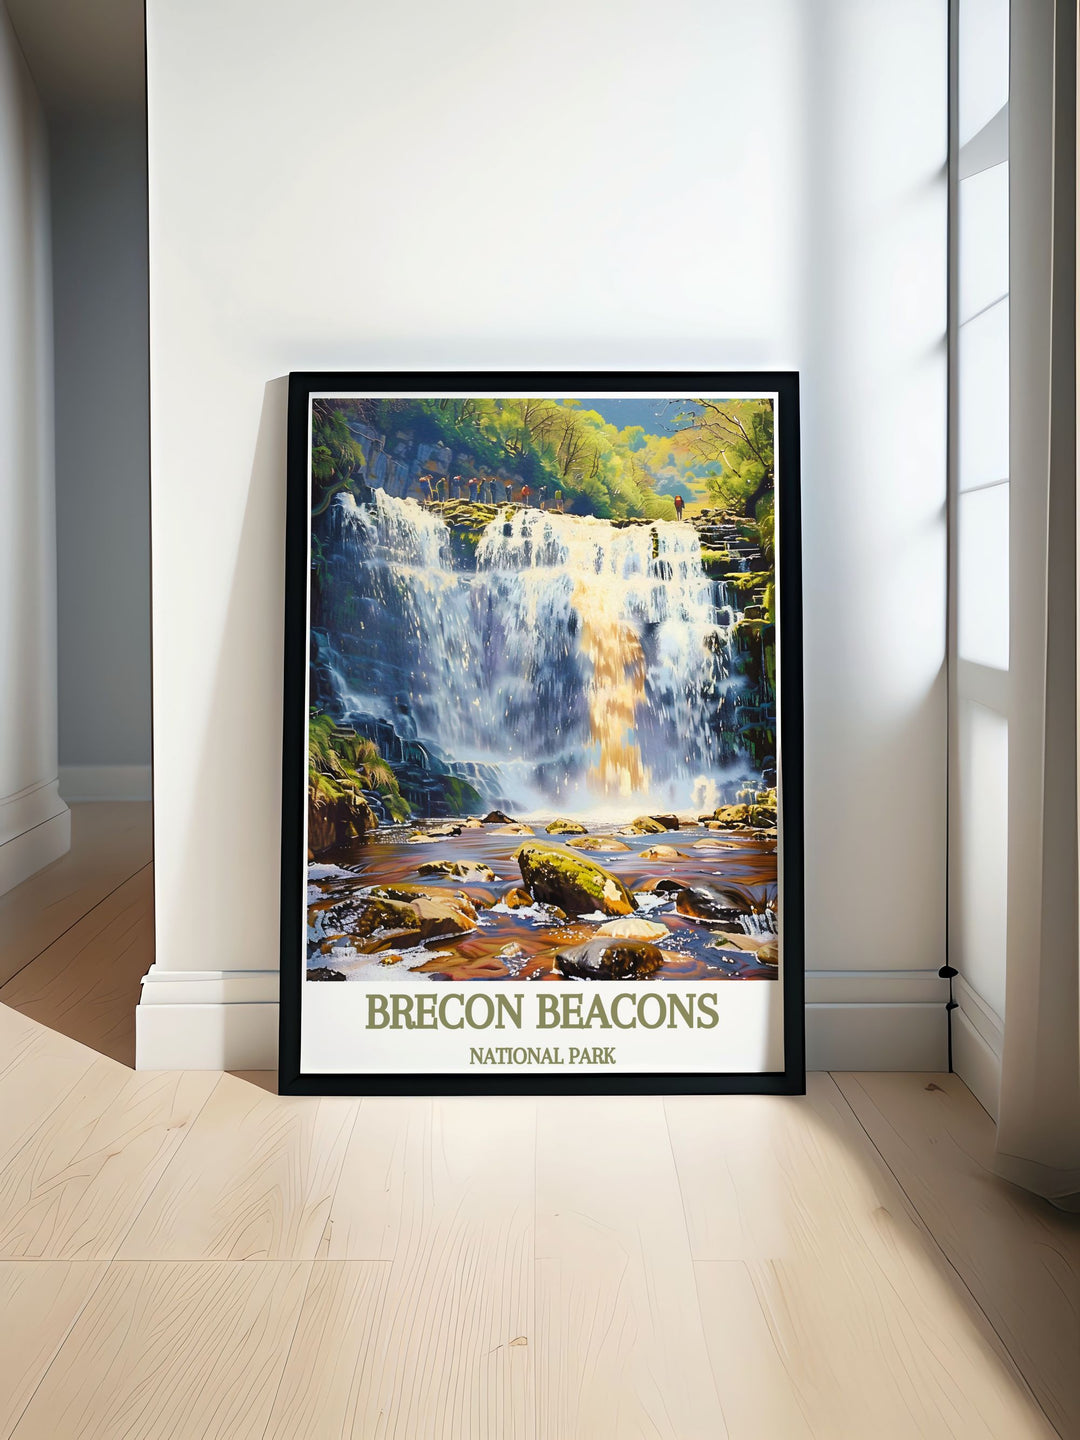 Stunning wall art featuring Sgwd yr Eira waterfall in the Brecon Beacons National Park. This captivating piece showcases the serene beauty of the cascading waters surrounded by lush greenery, bringing a touch of South Wales natural splendor to your home decor.